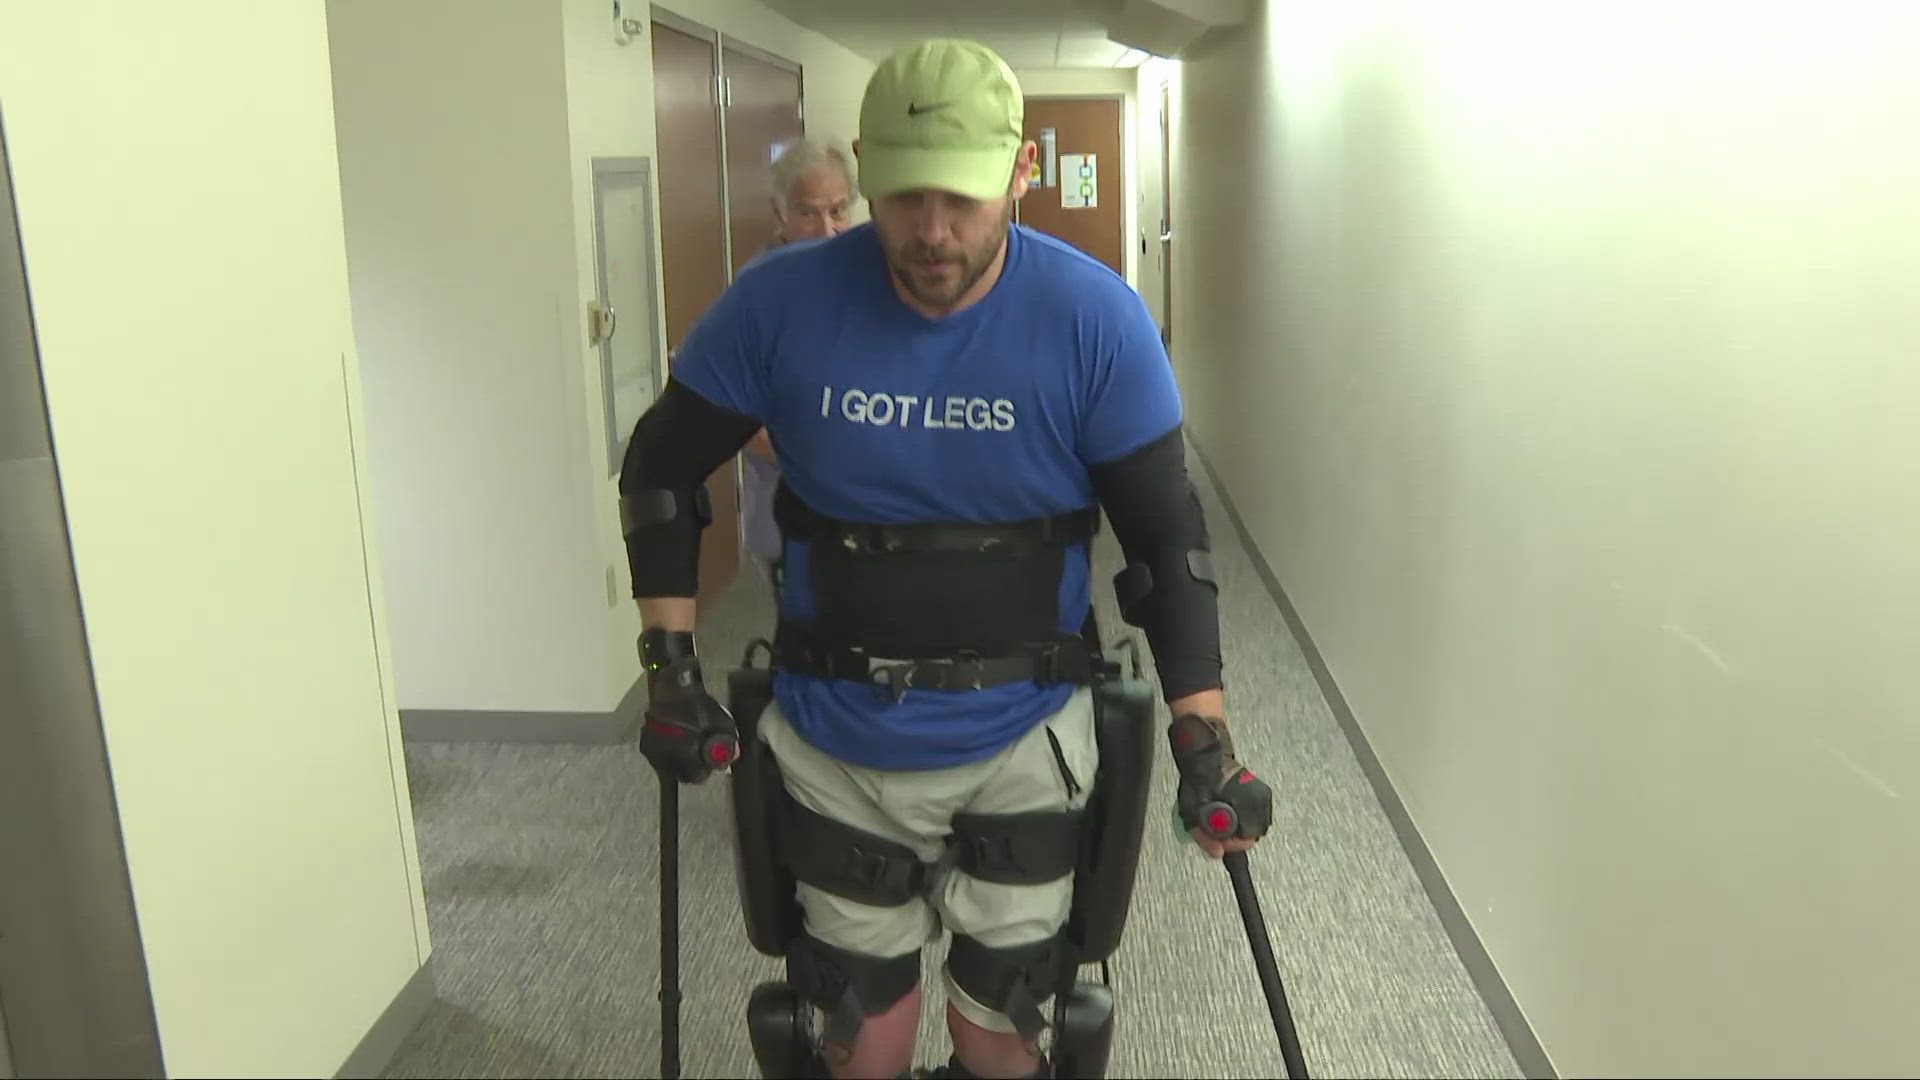 Adam Gorlitsky holds the Guinness World Record for fastest marathon distance in a robotic walking device. He plans to break that record in Cleveland.